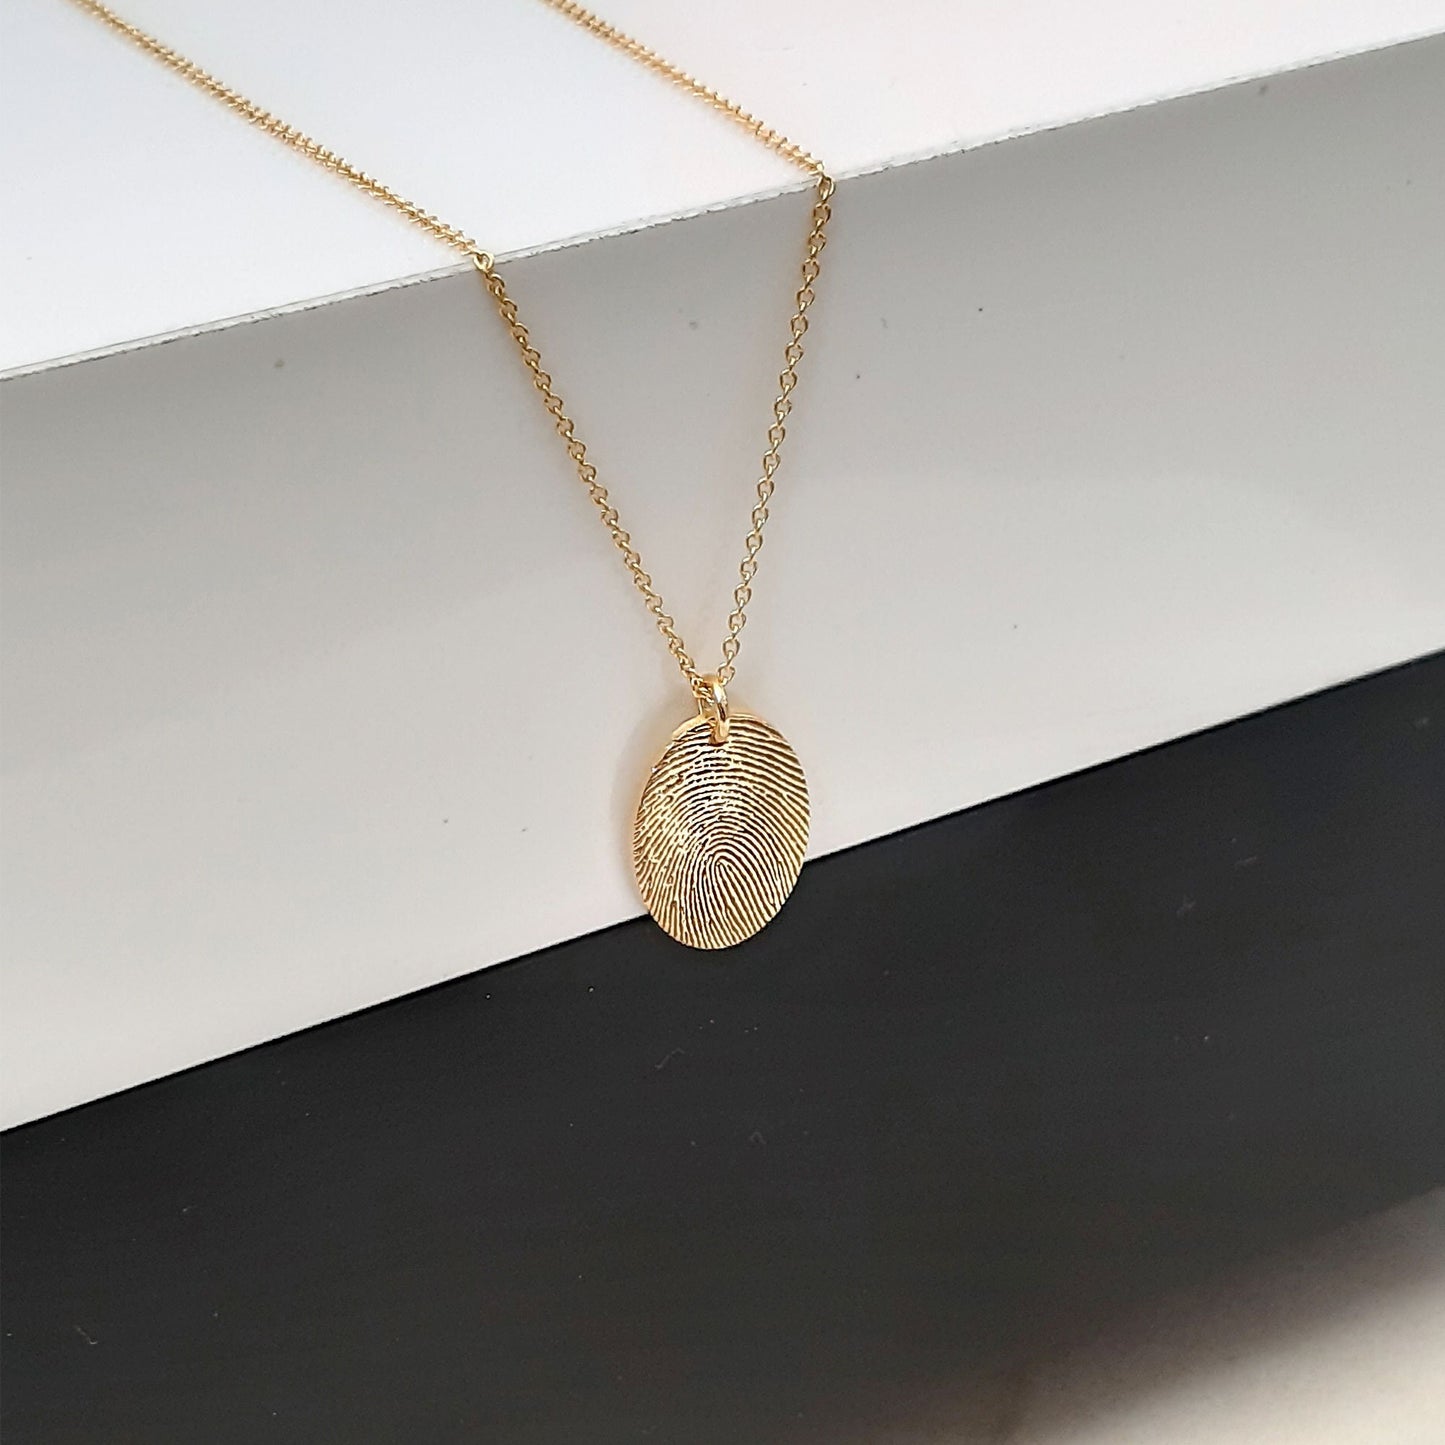 Fingerprint  Necklace in 14k yellow gold white gold rose gold , Actual Handwriting Memorial Fingerprint Jewelry, gold necklace family gift